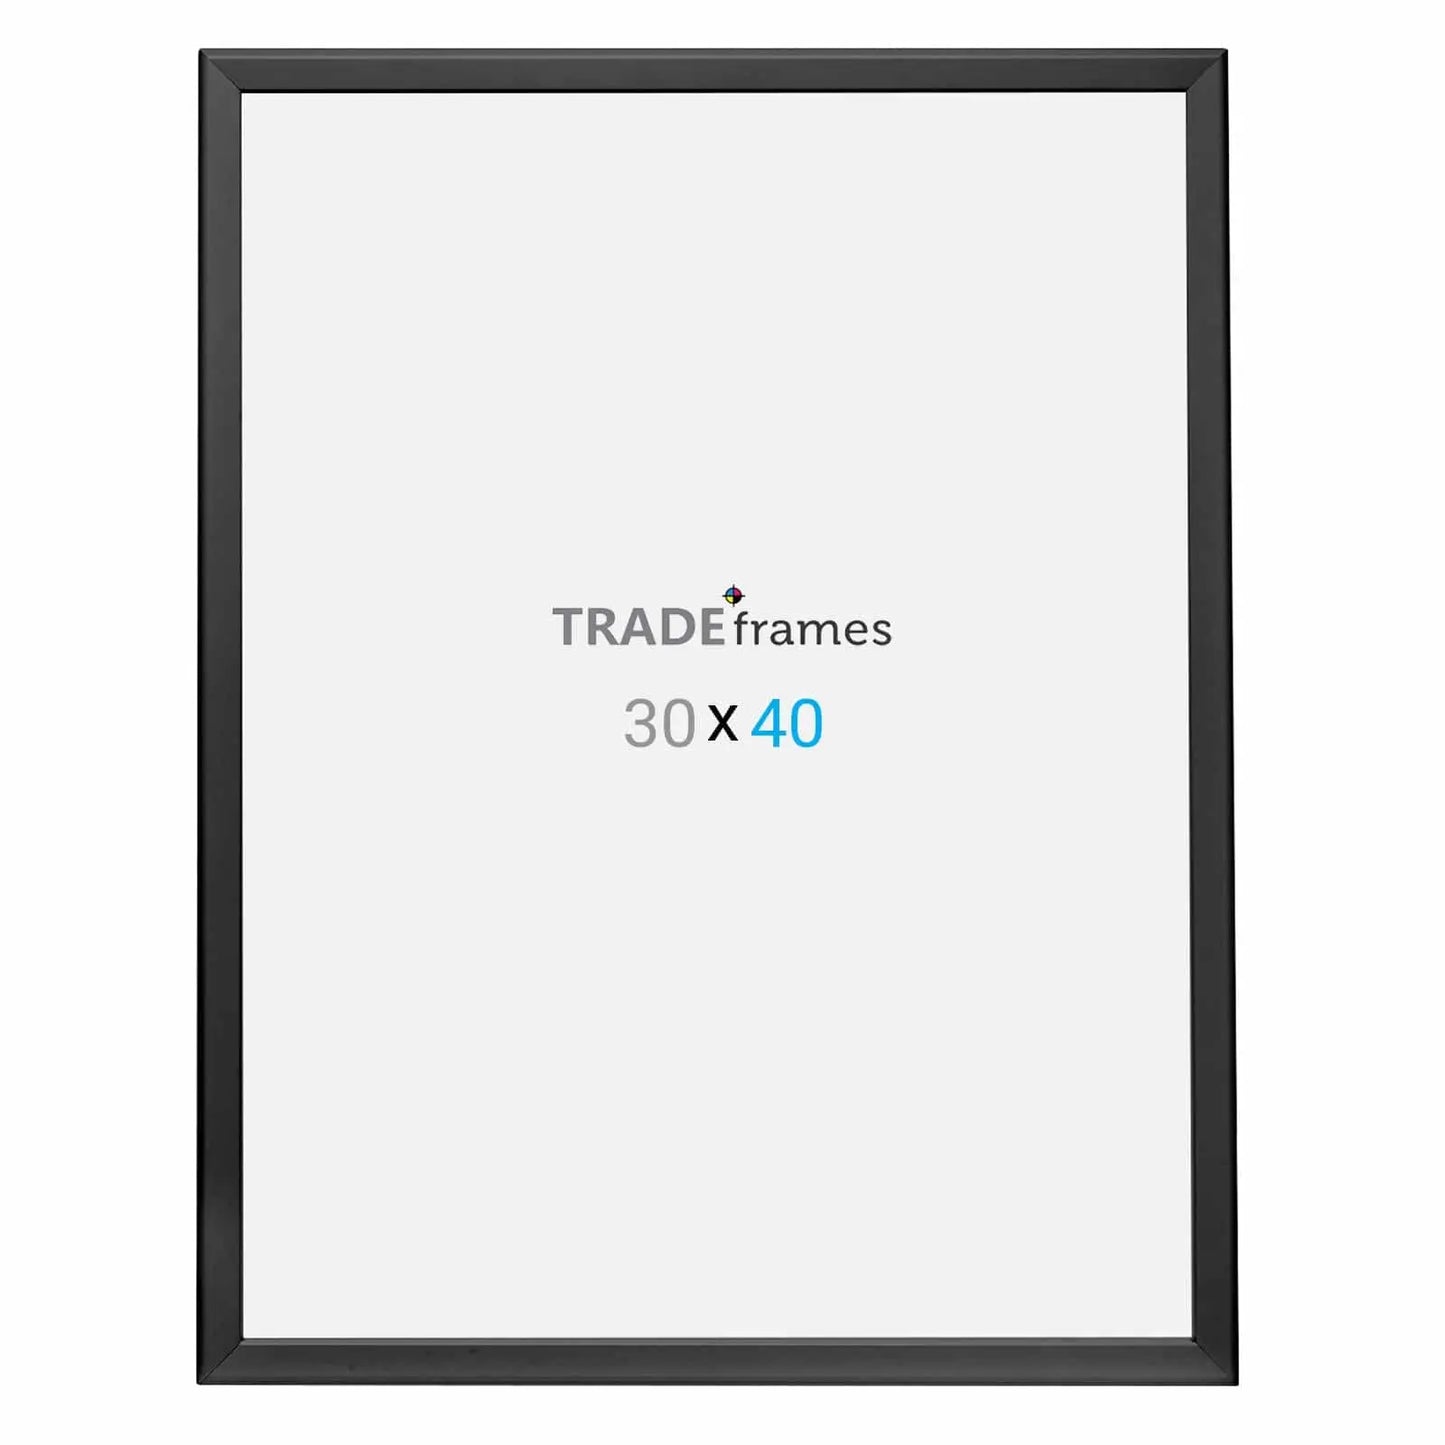 Classic Snap Frame, 1.25 Profile, 30 x 40 Poster Size